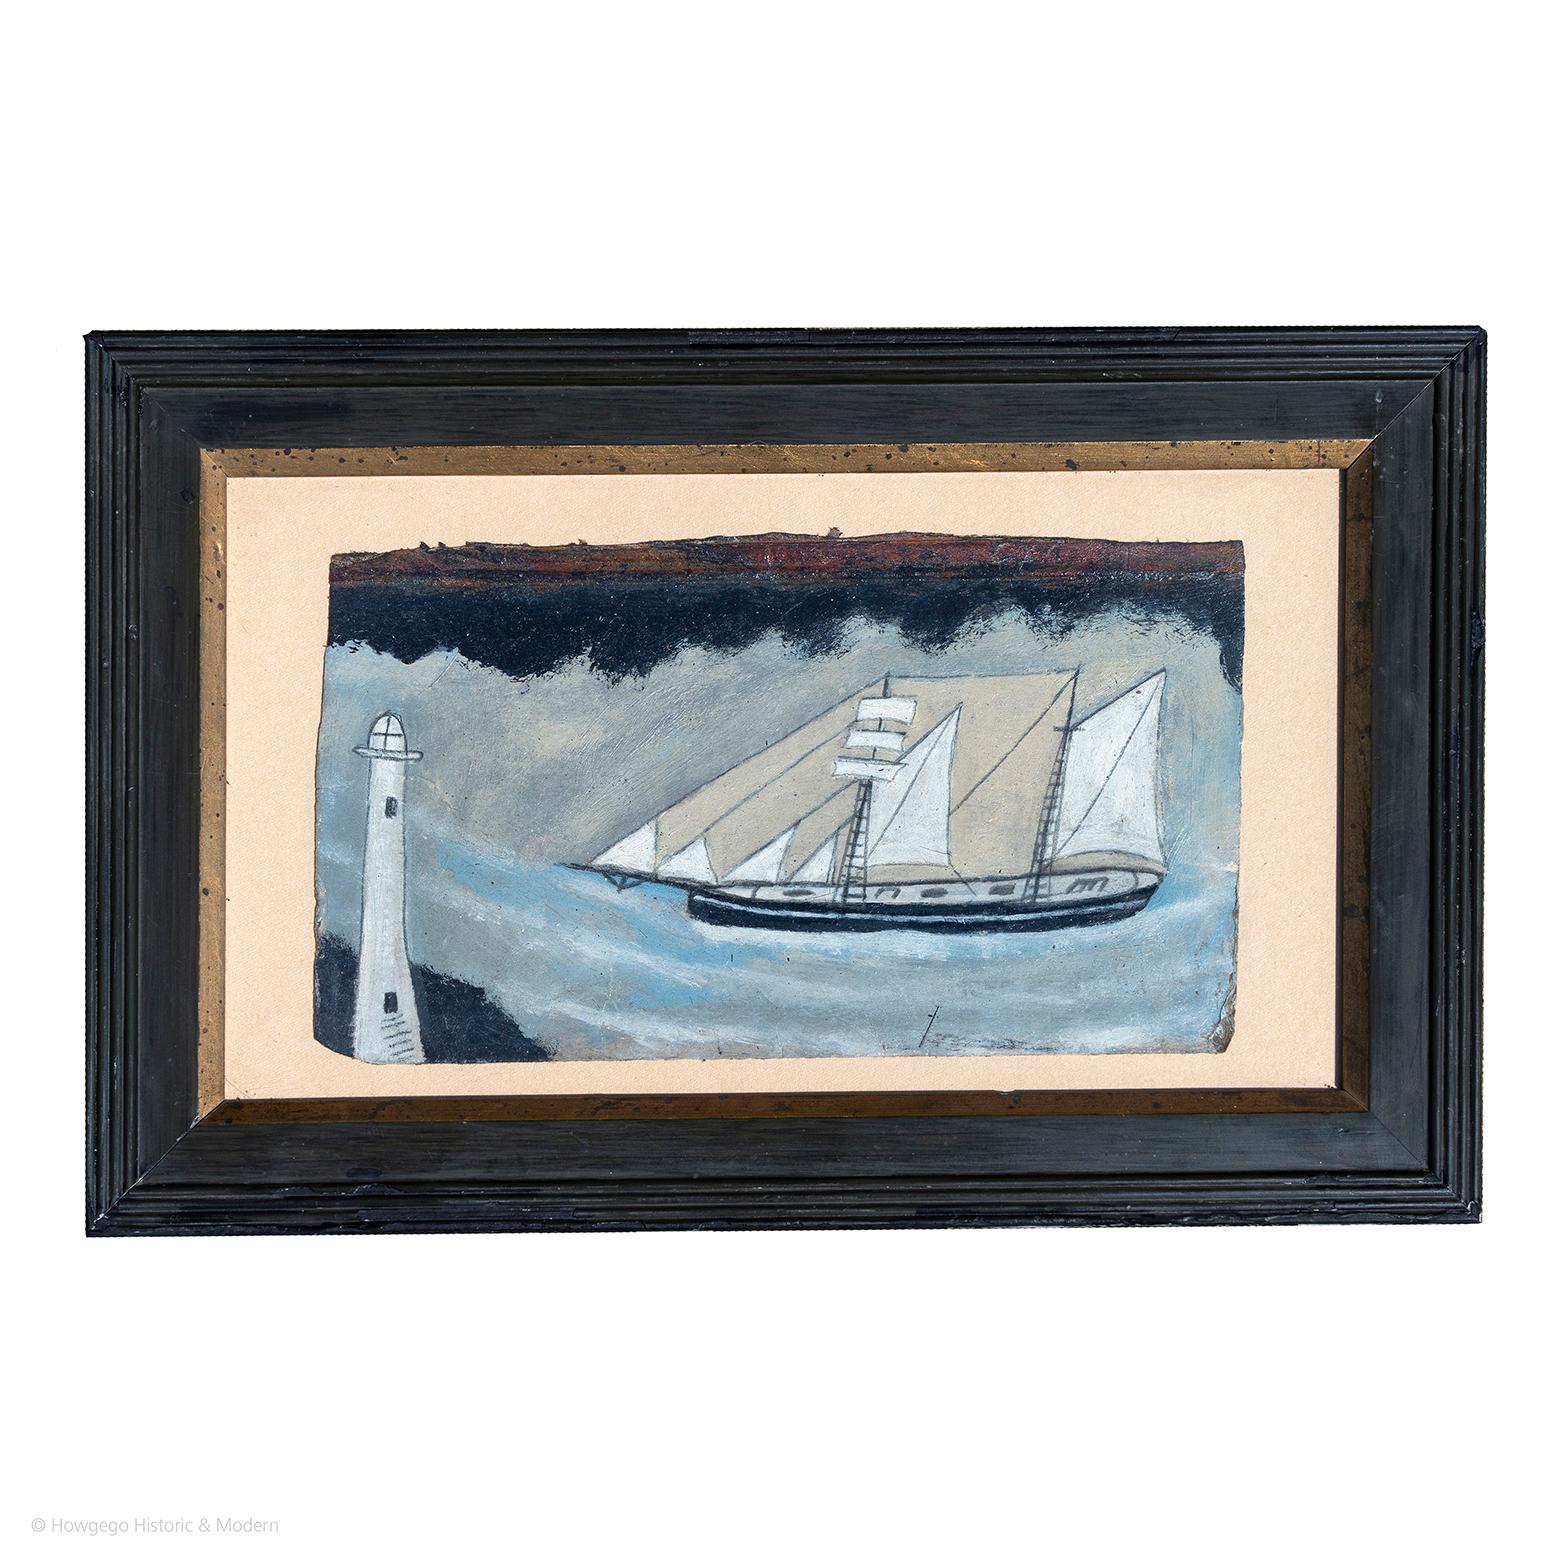 Lugger in full sail riding a wave past a lighthouse with land on the horizon.
Characterful naive picture in the spirit of Alfred Wallis.
Provenance: Part of a small collection of similar pictures, illustrated.

Board length 24cm., 9 1/2